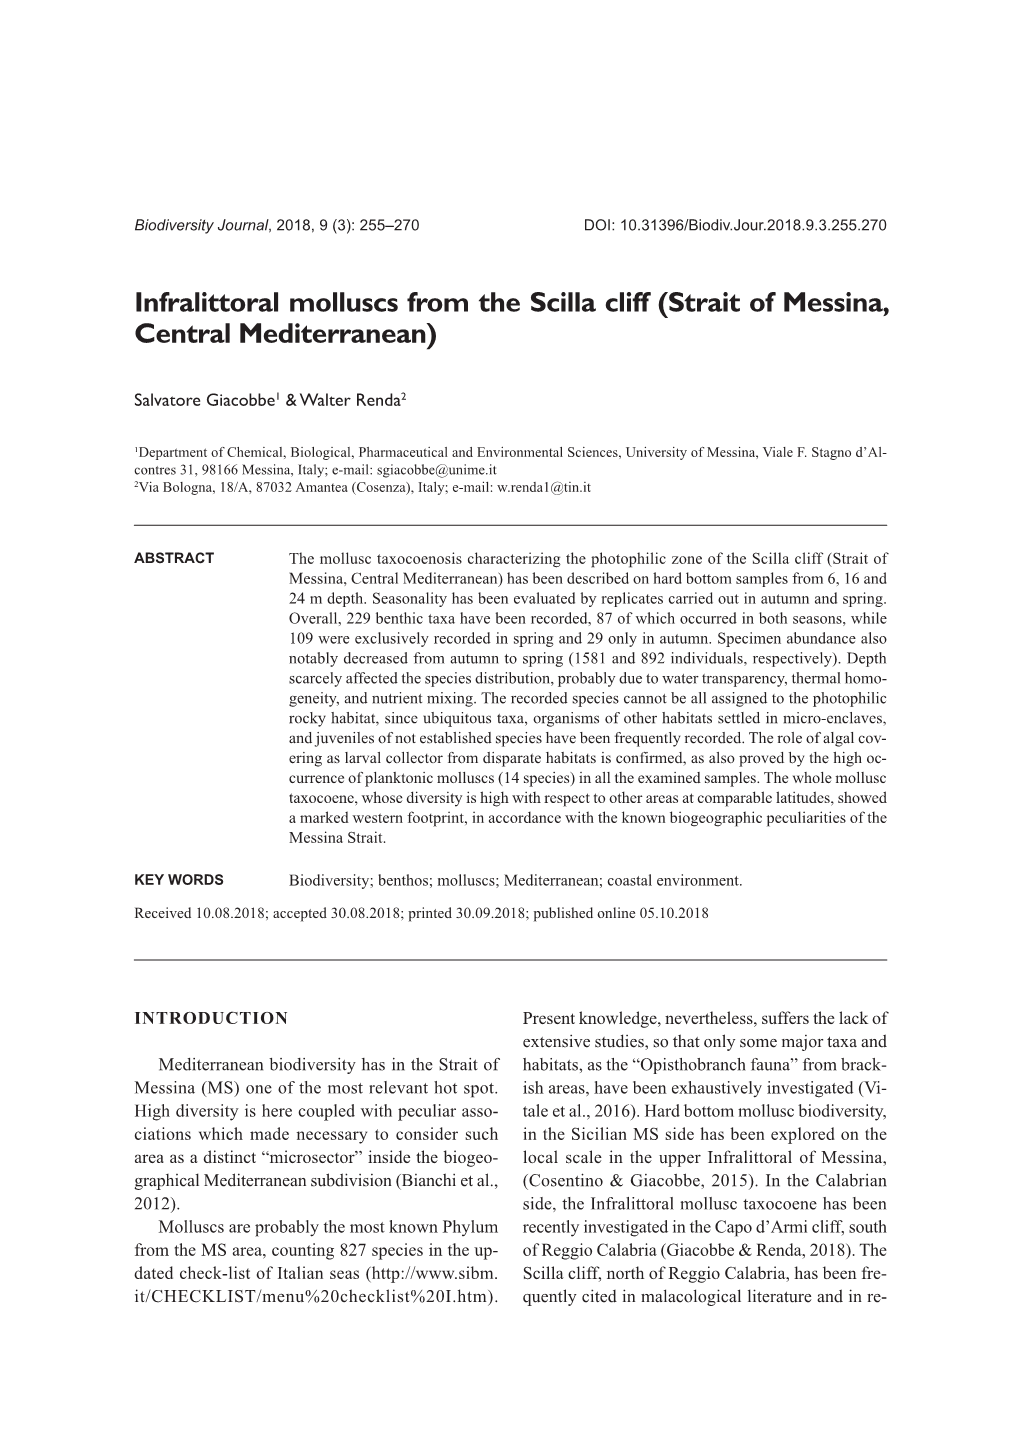 Infralittoral Molluscs from the Scilla Cliff (Strait of Messina, Central Mediterranean)